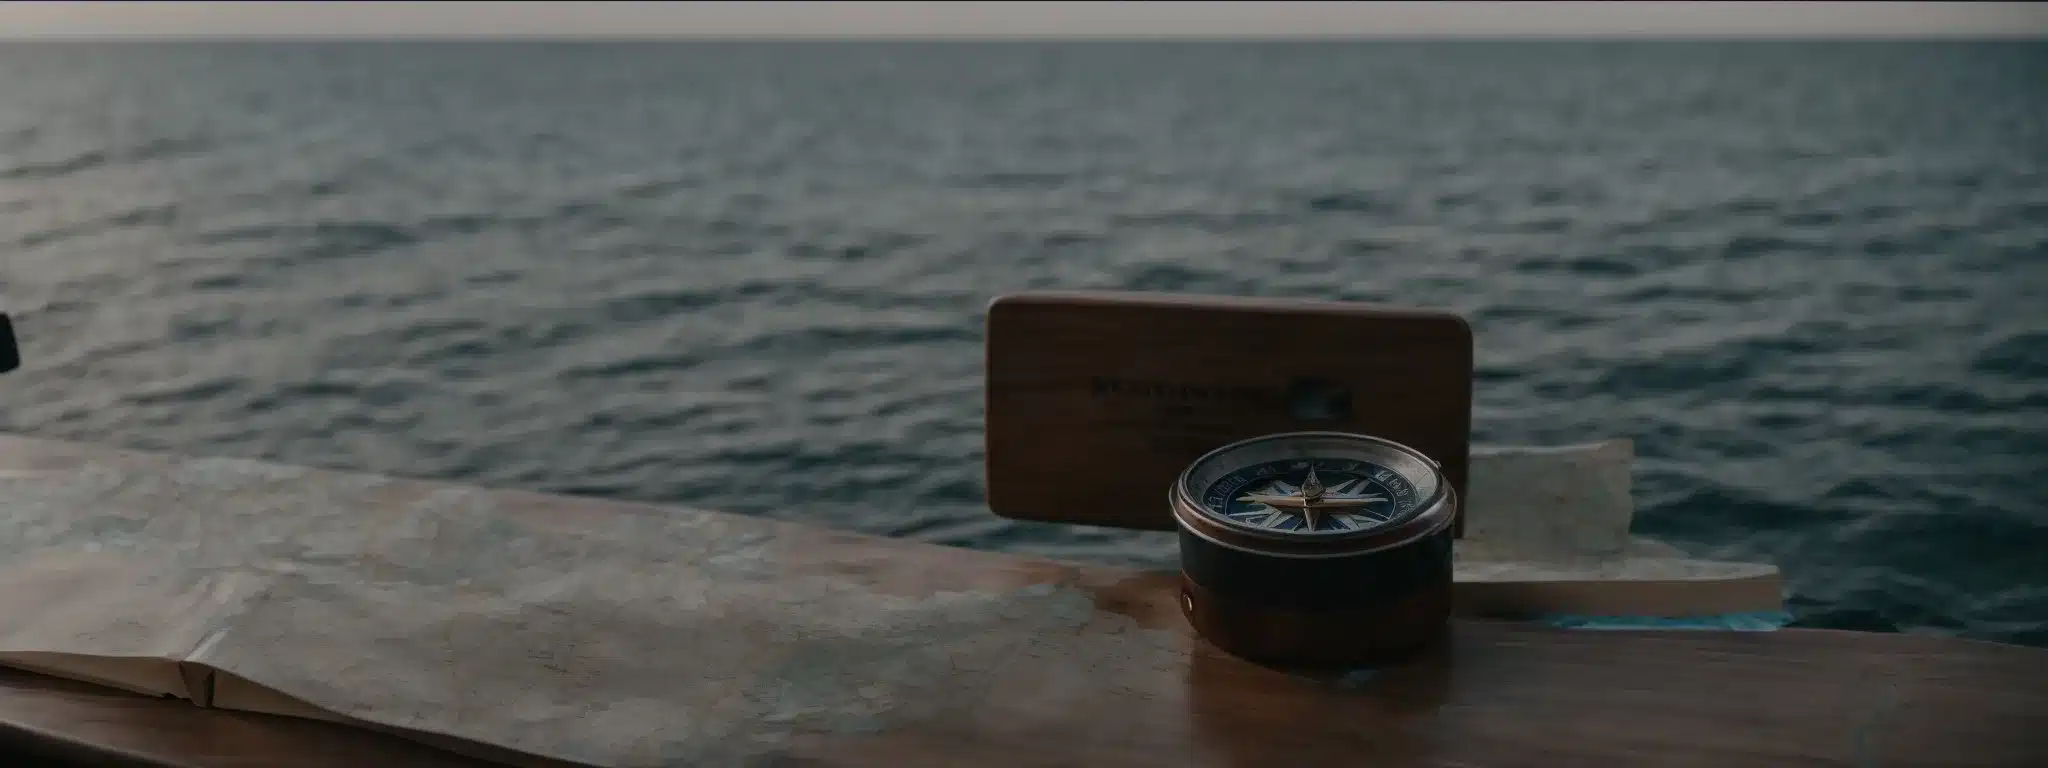 A Compass And Map On A Table Beside The Wheel Of A Ship, With The Vast Sea In The Background.